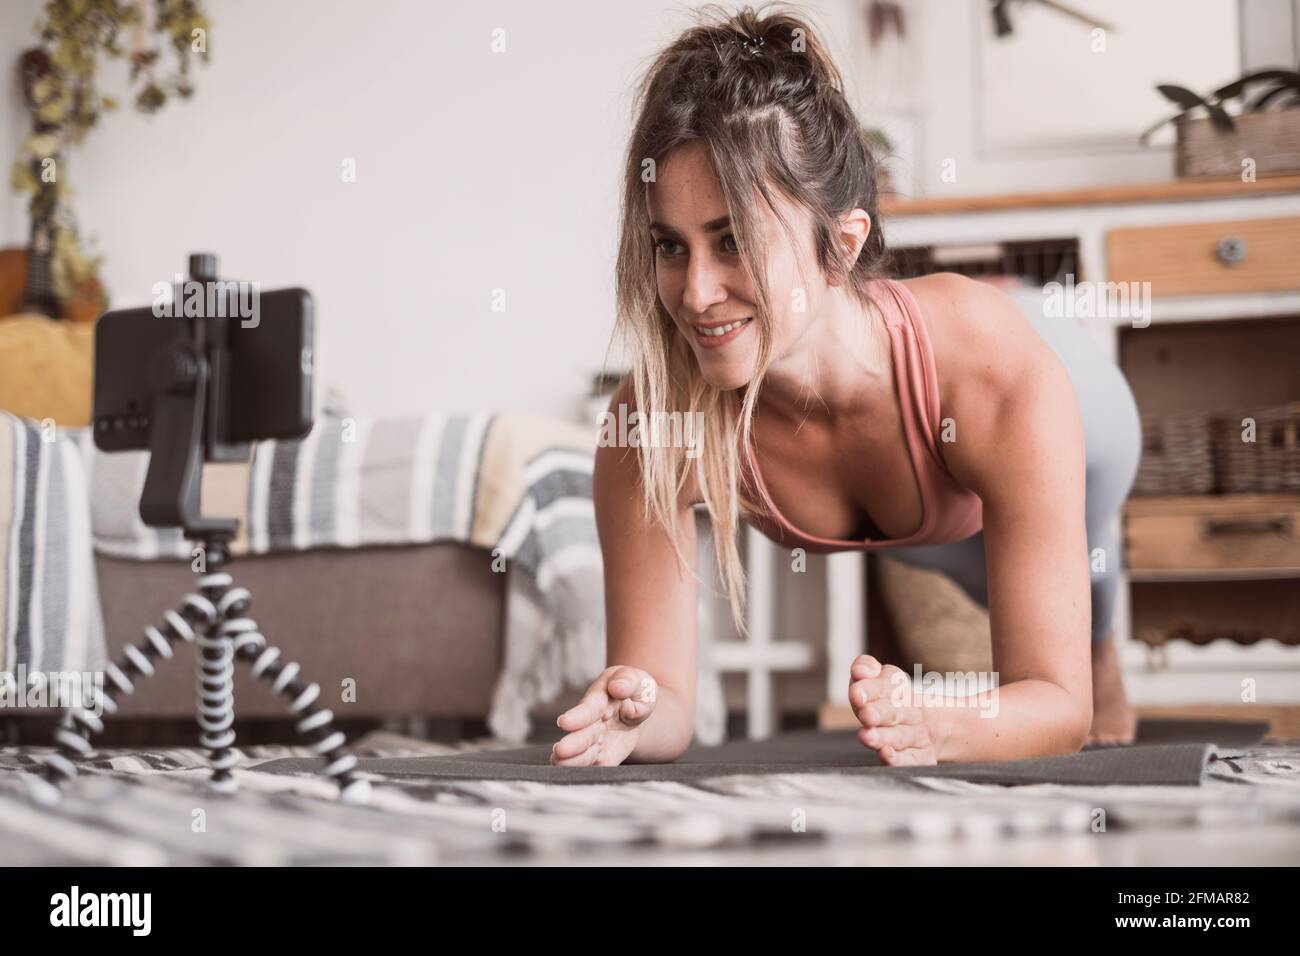 https://c8.alamy.com/comp/2FMAR82/young-sporty-woman-working-out-at-home-teenager-doing-fitness-exercises-on-living-room-floor-for-buttocks-body-shaping-using-online-personal-training-program-with-phone-doing-yoga-pilates-indoors-2FMAR82.jpg